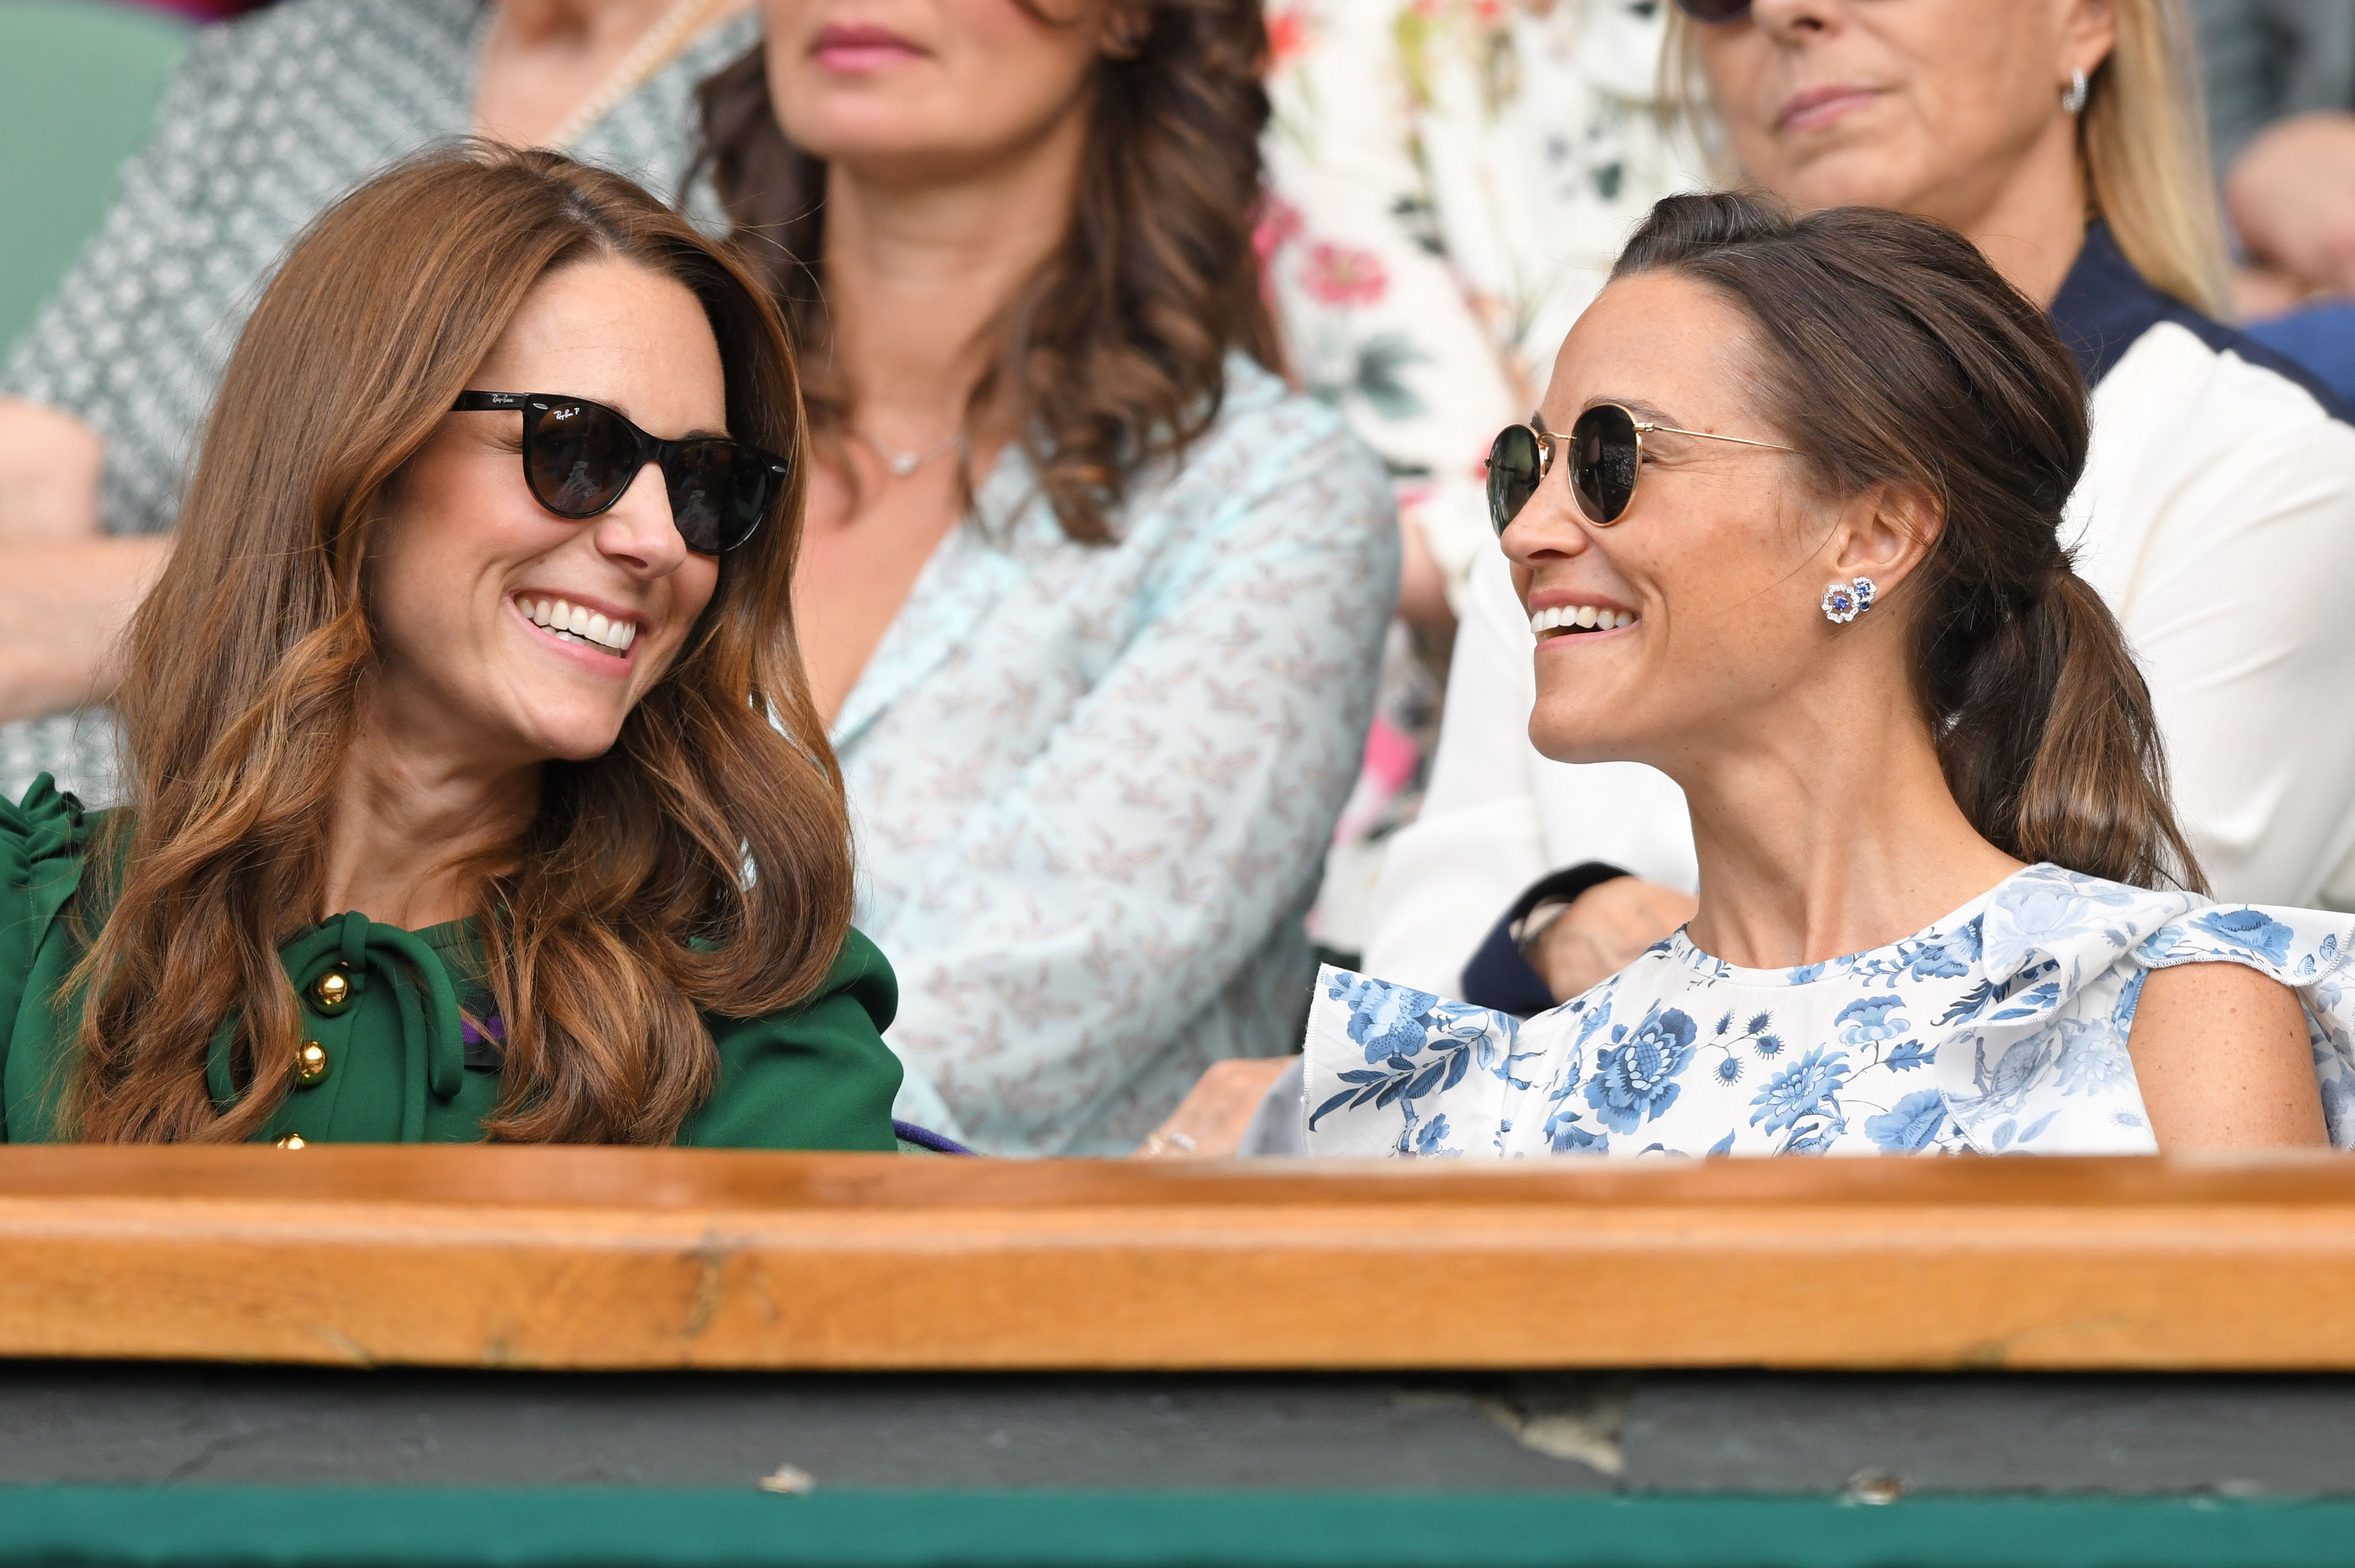 Kate and Pippa Middleton in the Royal Box on Centre Court during day twelve of the Wimbledon Tennis Championships at All England Lawn Tennis and Croquet Club on July 13, 2019, in London, England. | Source: Getty Images